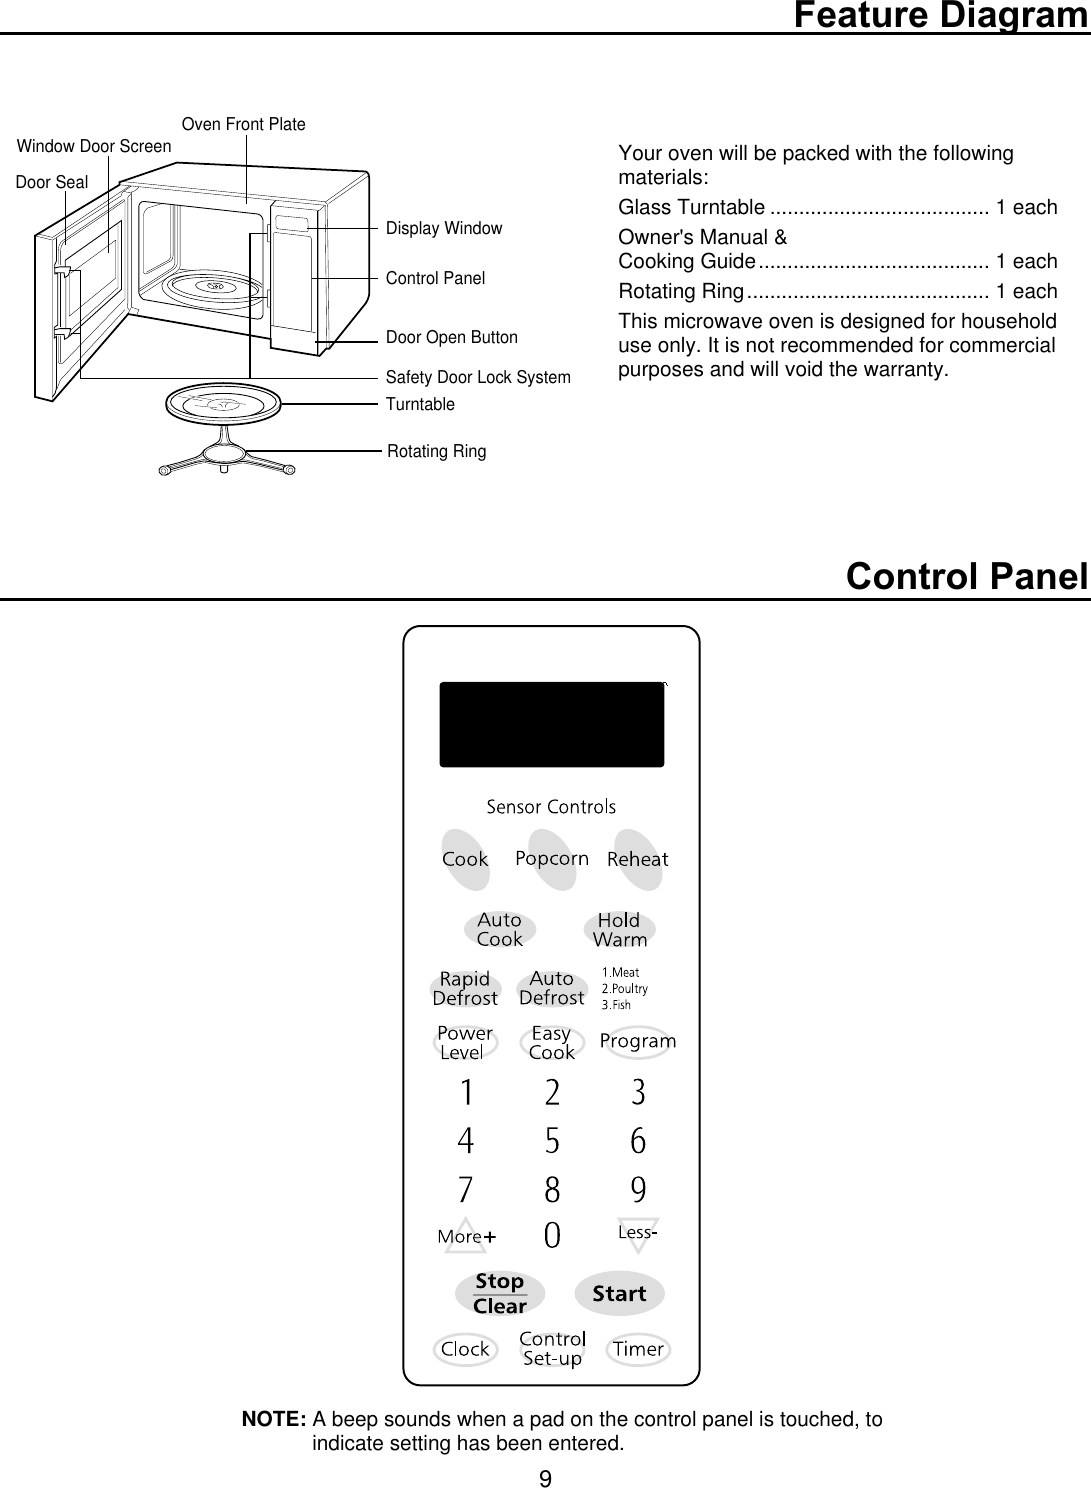 Feature DiagramControl Panel9Oven Front Plate Window Door ScreenDoor SealDisplay WindowControl PanelDoor Open ButtonSafety Door Lock SystemTurntableRotating RingYour oven will be packed with the followingmaterials:Glass Turntable ...................................... 1 eachOwner&apos;s Manual &amp;Cooking Guide........................................ 1 eachRotating Ring.......................................... 1 eachThis microwave oven is designed for household use only. It is not recommended for commercialpurposes and will void the warranty.NOTE: A beep sounds when a pad on the control panel is touched, toindicate setting has been entered. 